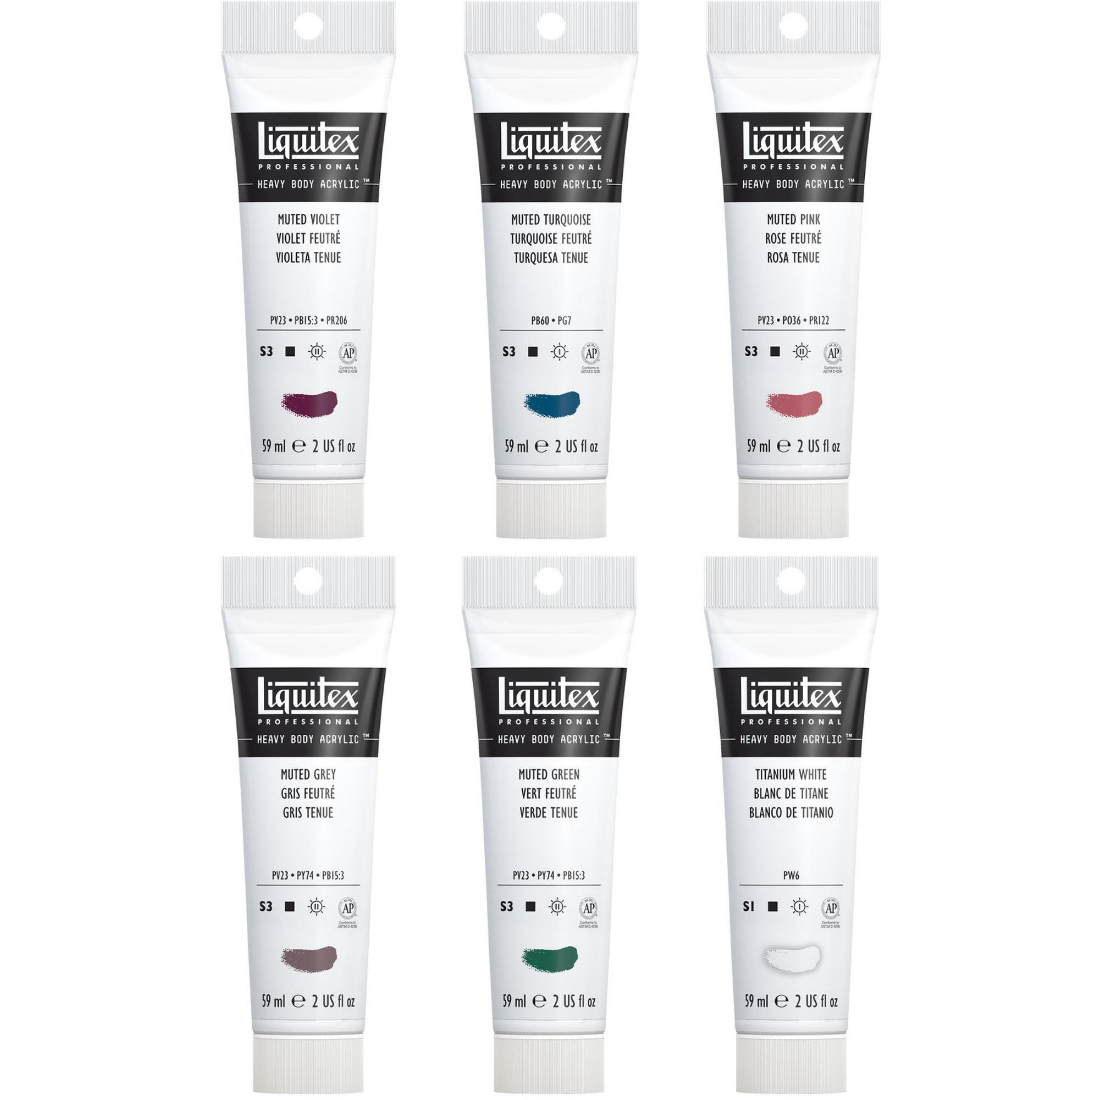 Acrílico Heavy Body Profissional Muted Collection liquitex